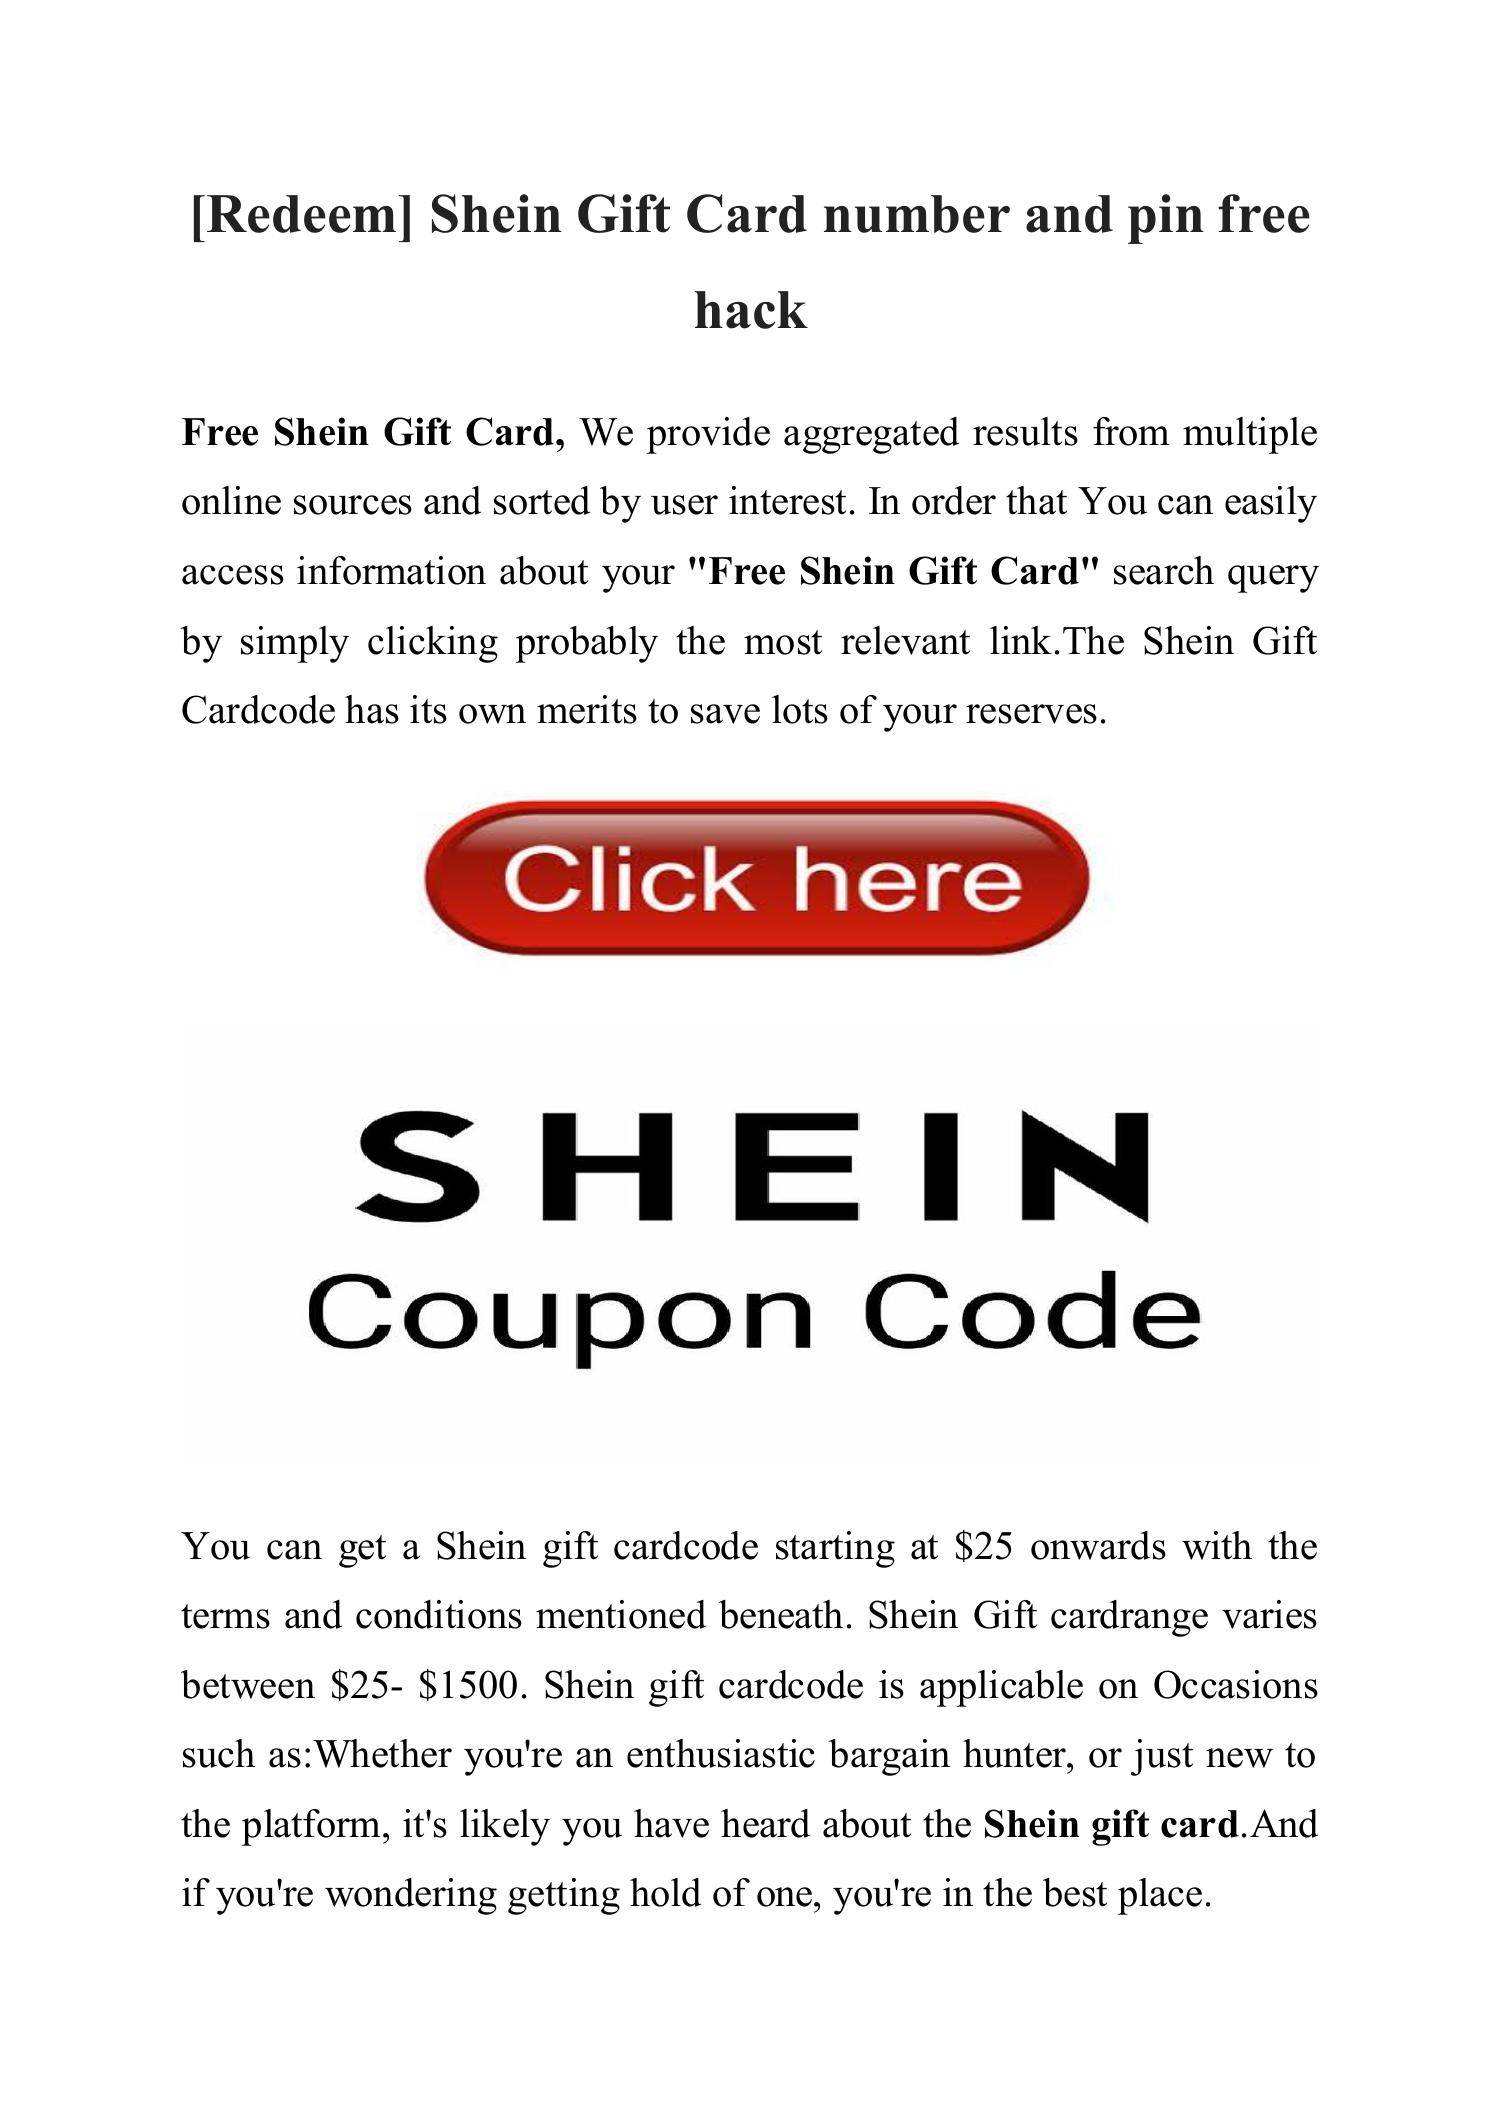 redeem-shein-gift-card-number-and-pin-free-hack-pdf-docdroid